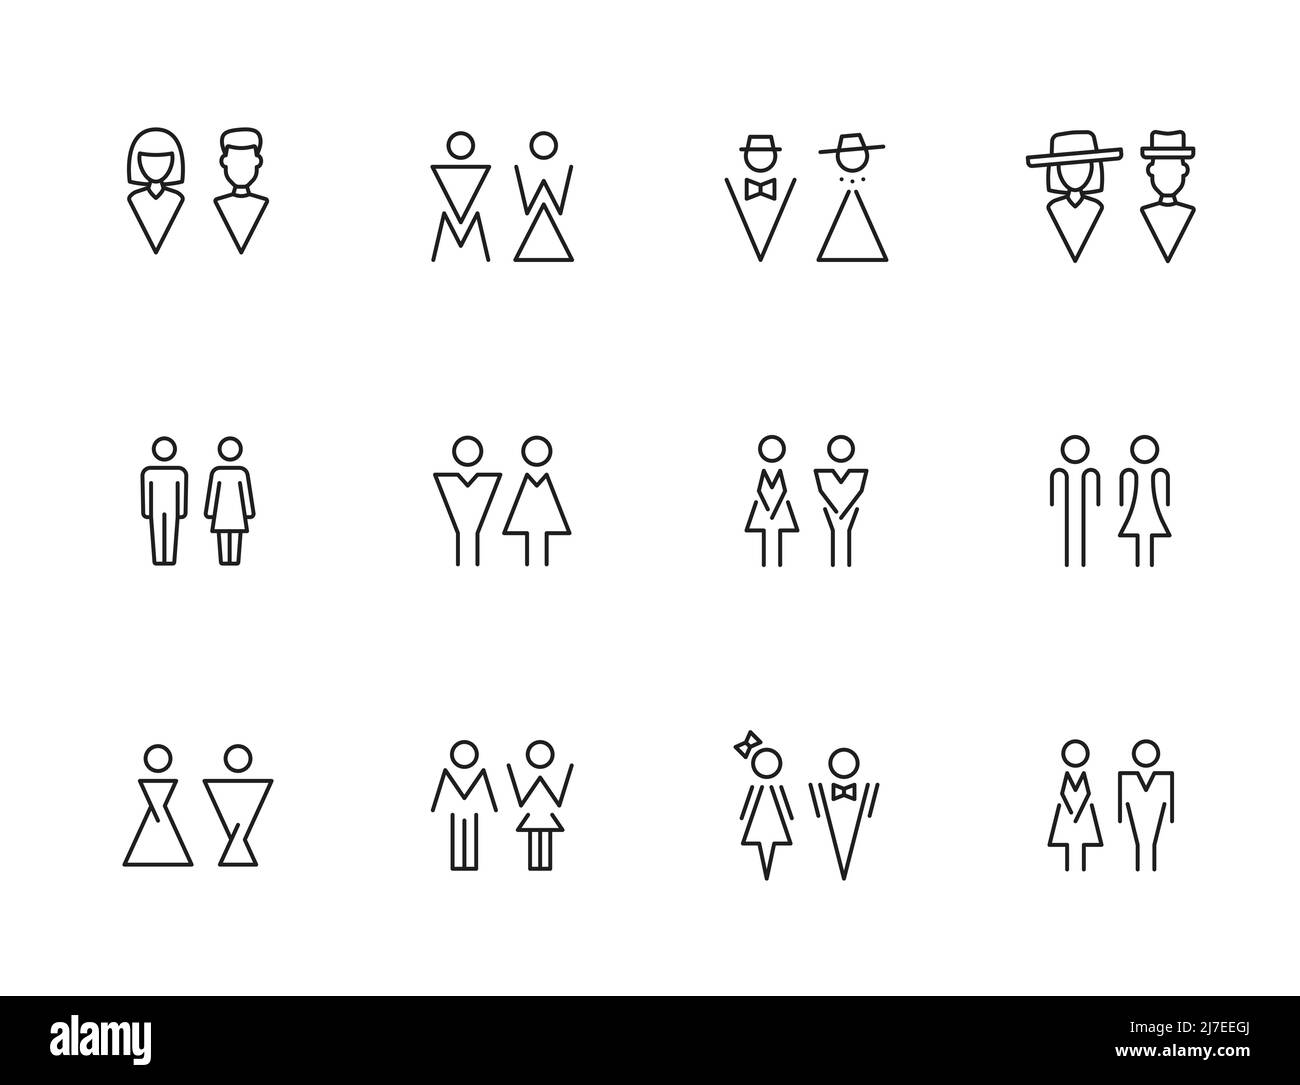 Toilet icons and symbols of male and female restroom. Water closet vector signs of isolated thin line silhouettes of man and woman, lady and gentleman figures for public toilet Stock Vector